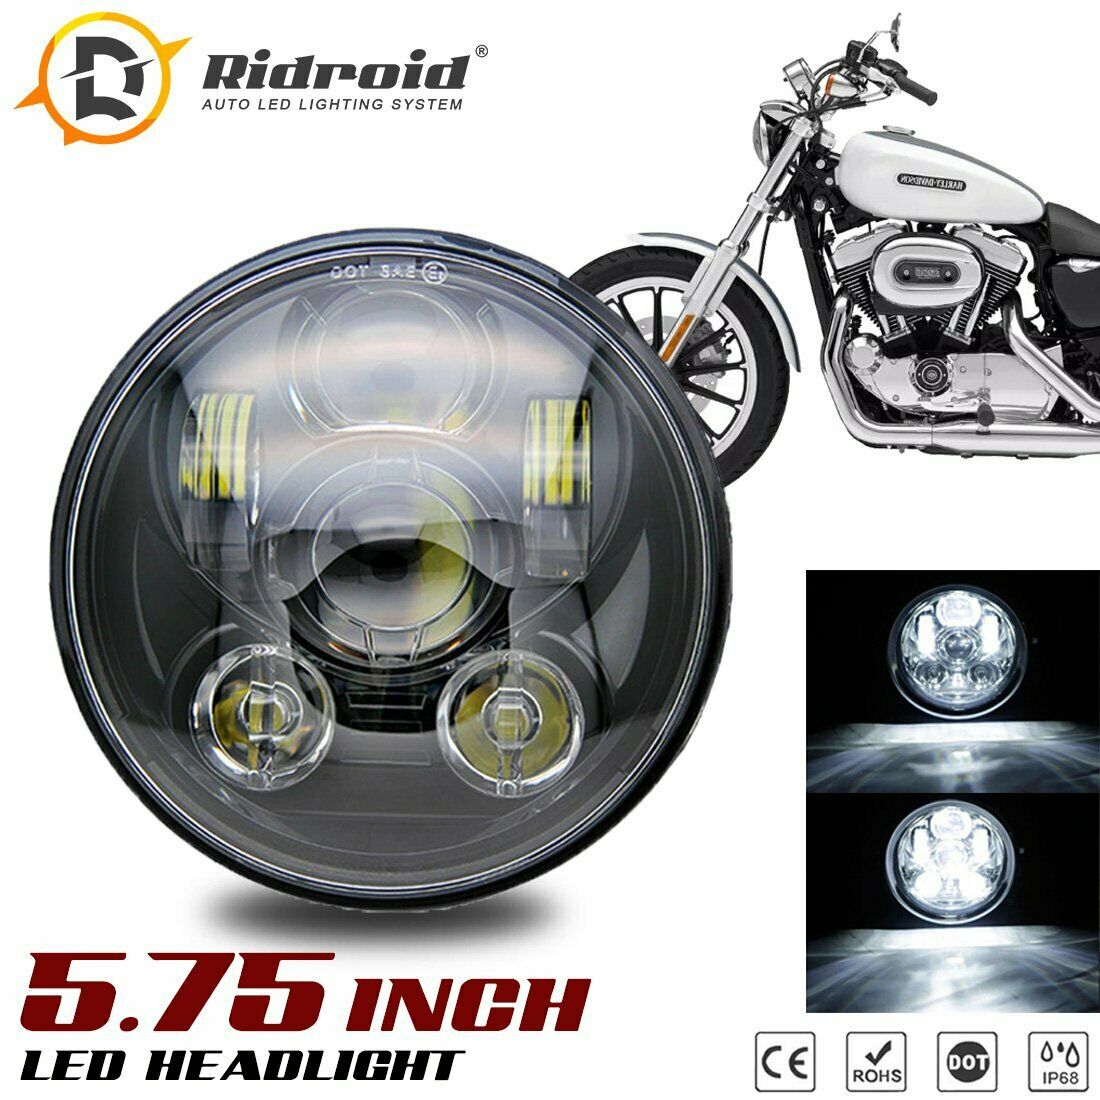 FieryRed Liteway 5.75 Round Motorcycles LED Headlight t for Motorcycles,80w LED Passing Ligh Black 